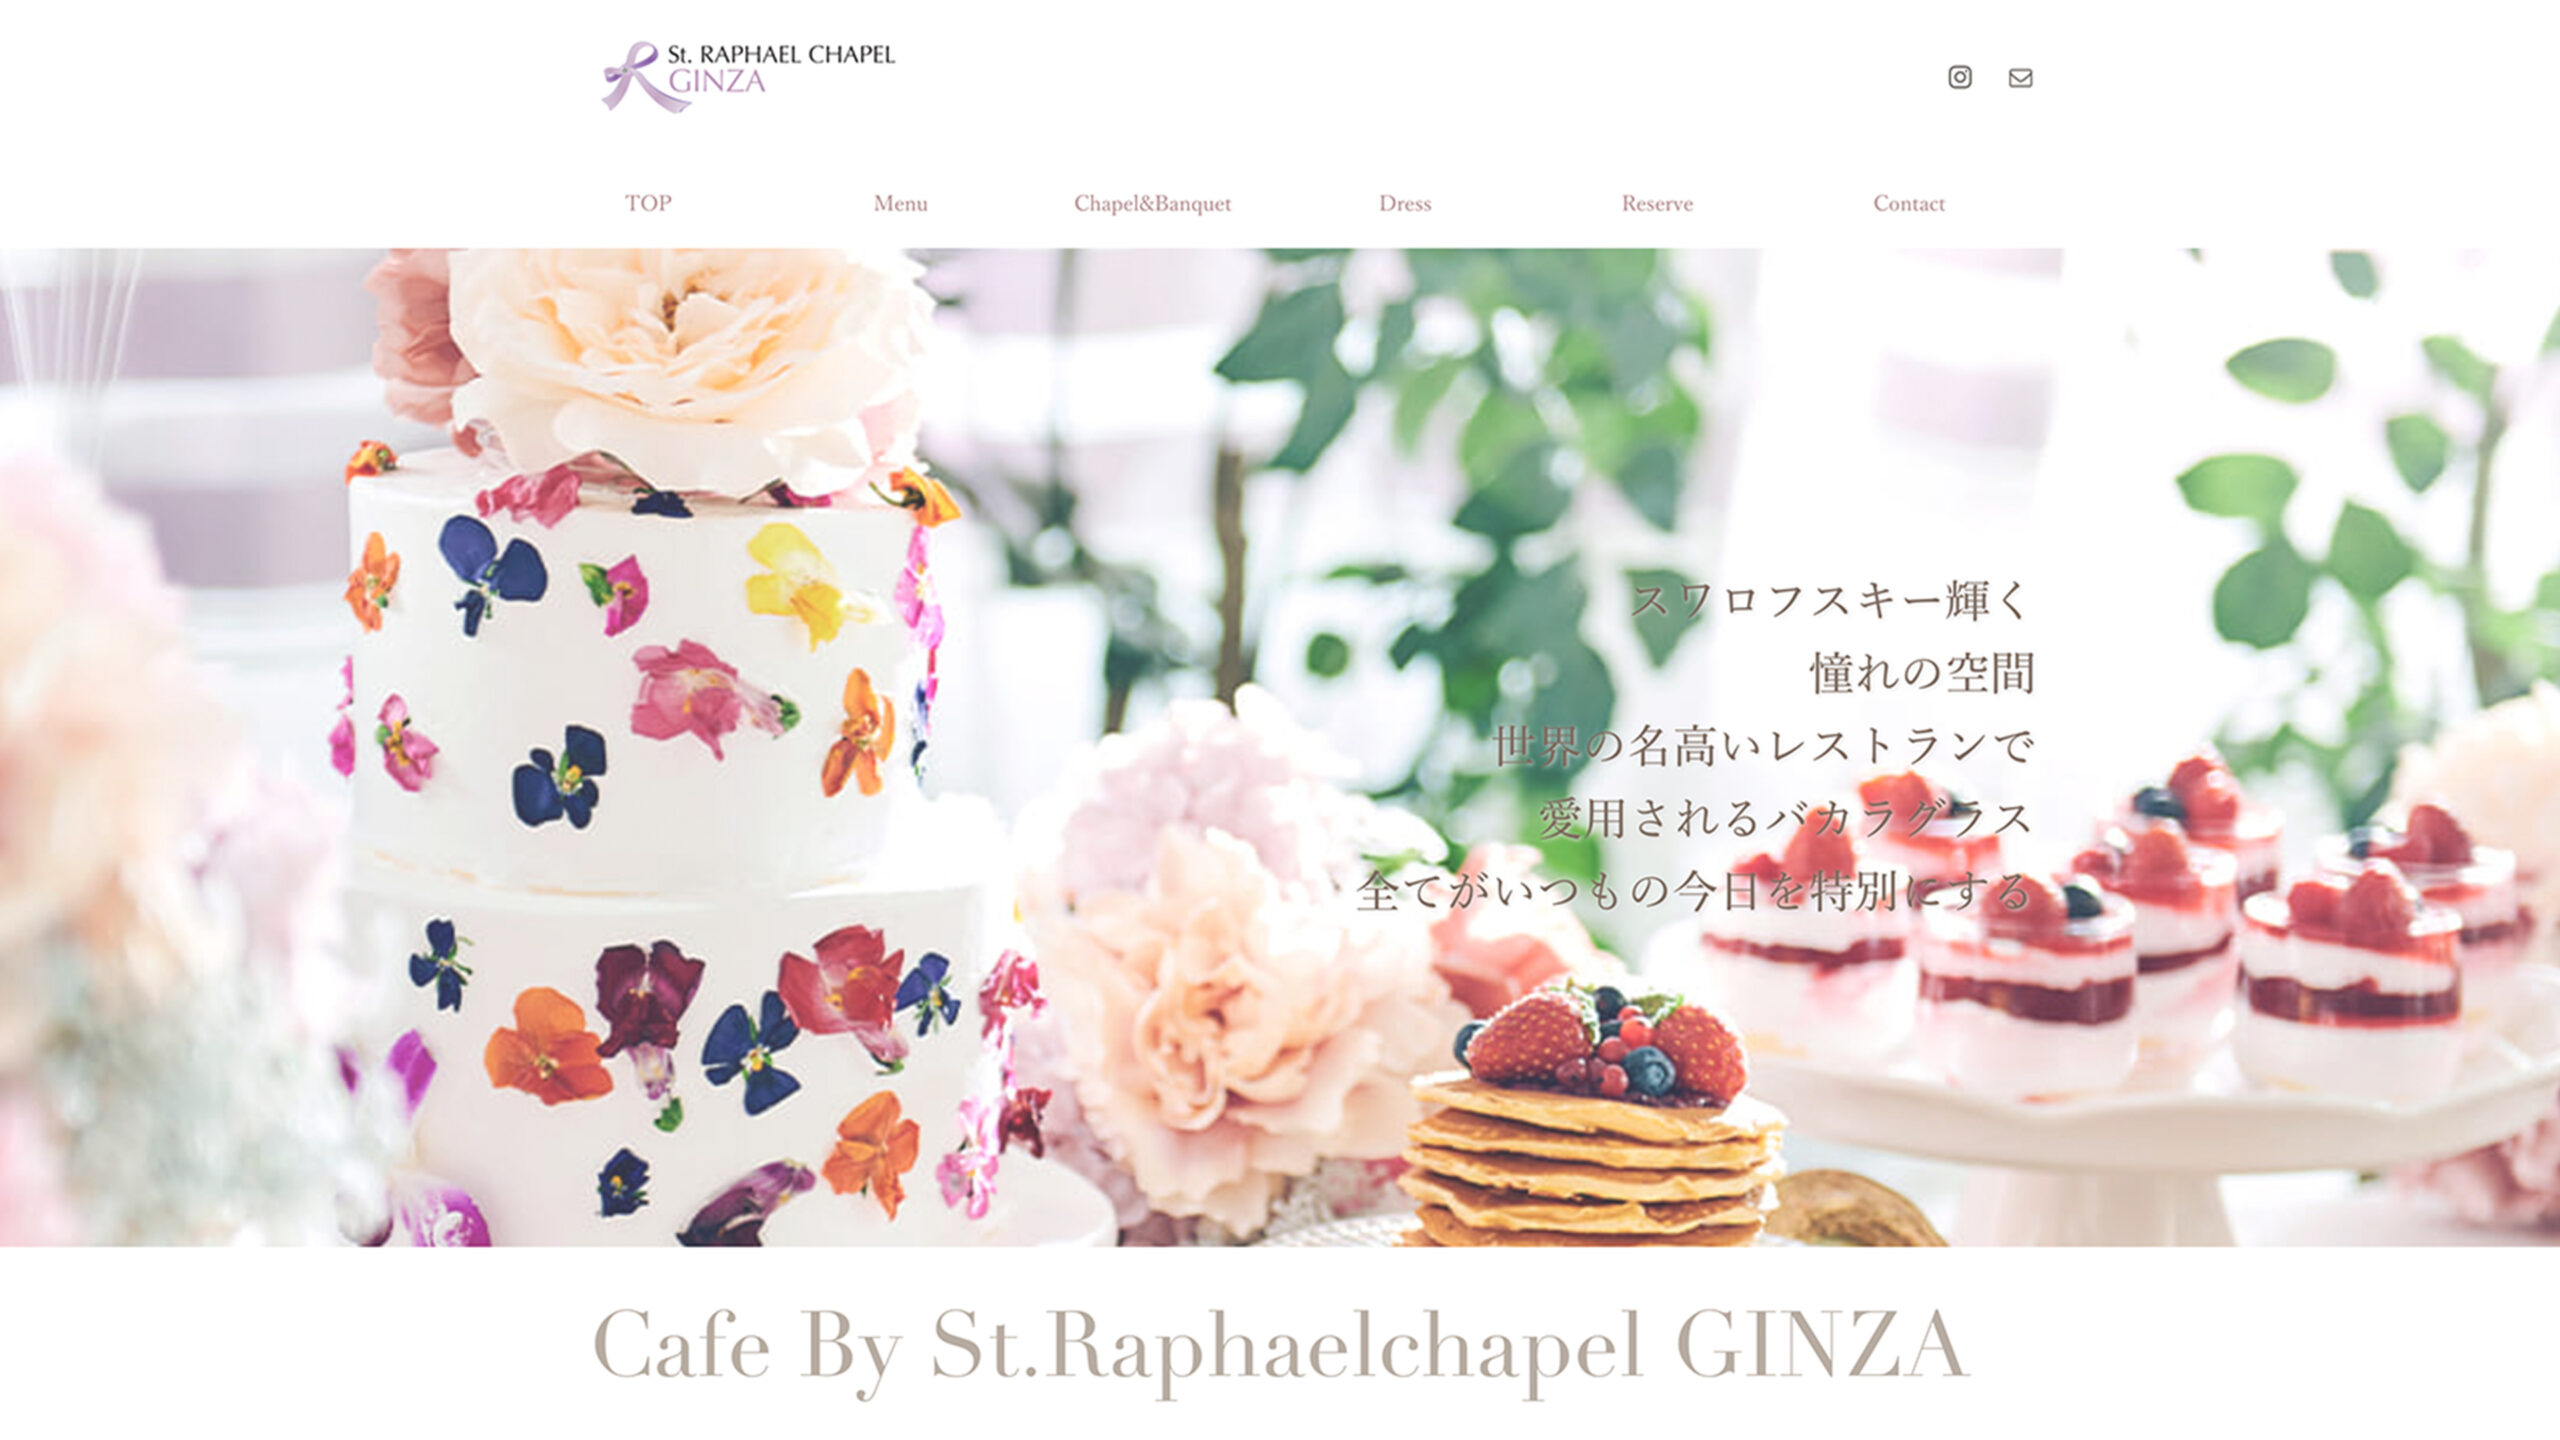 Cafe By St.Raphaelchapel GINZA 様